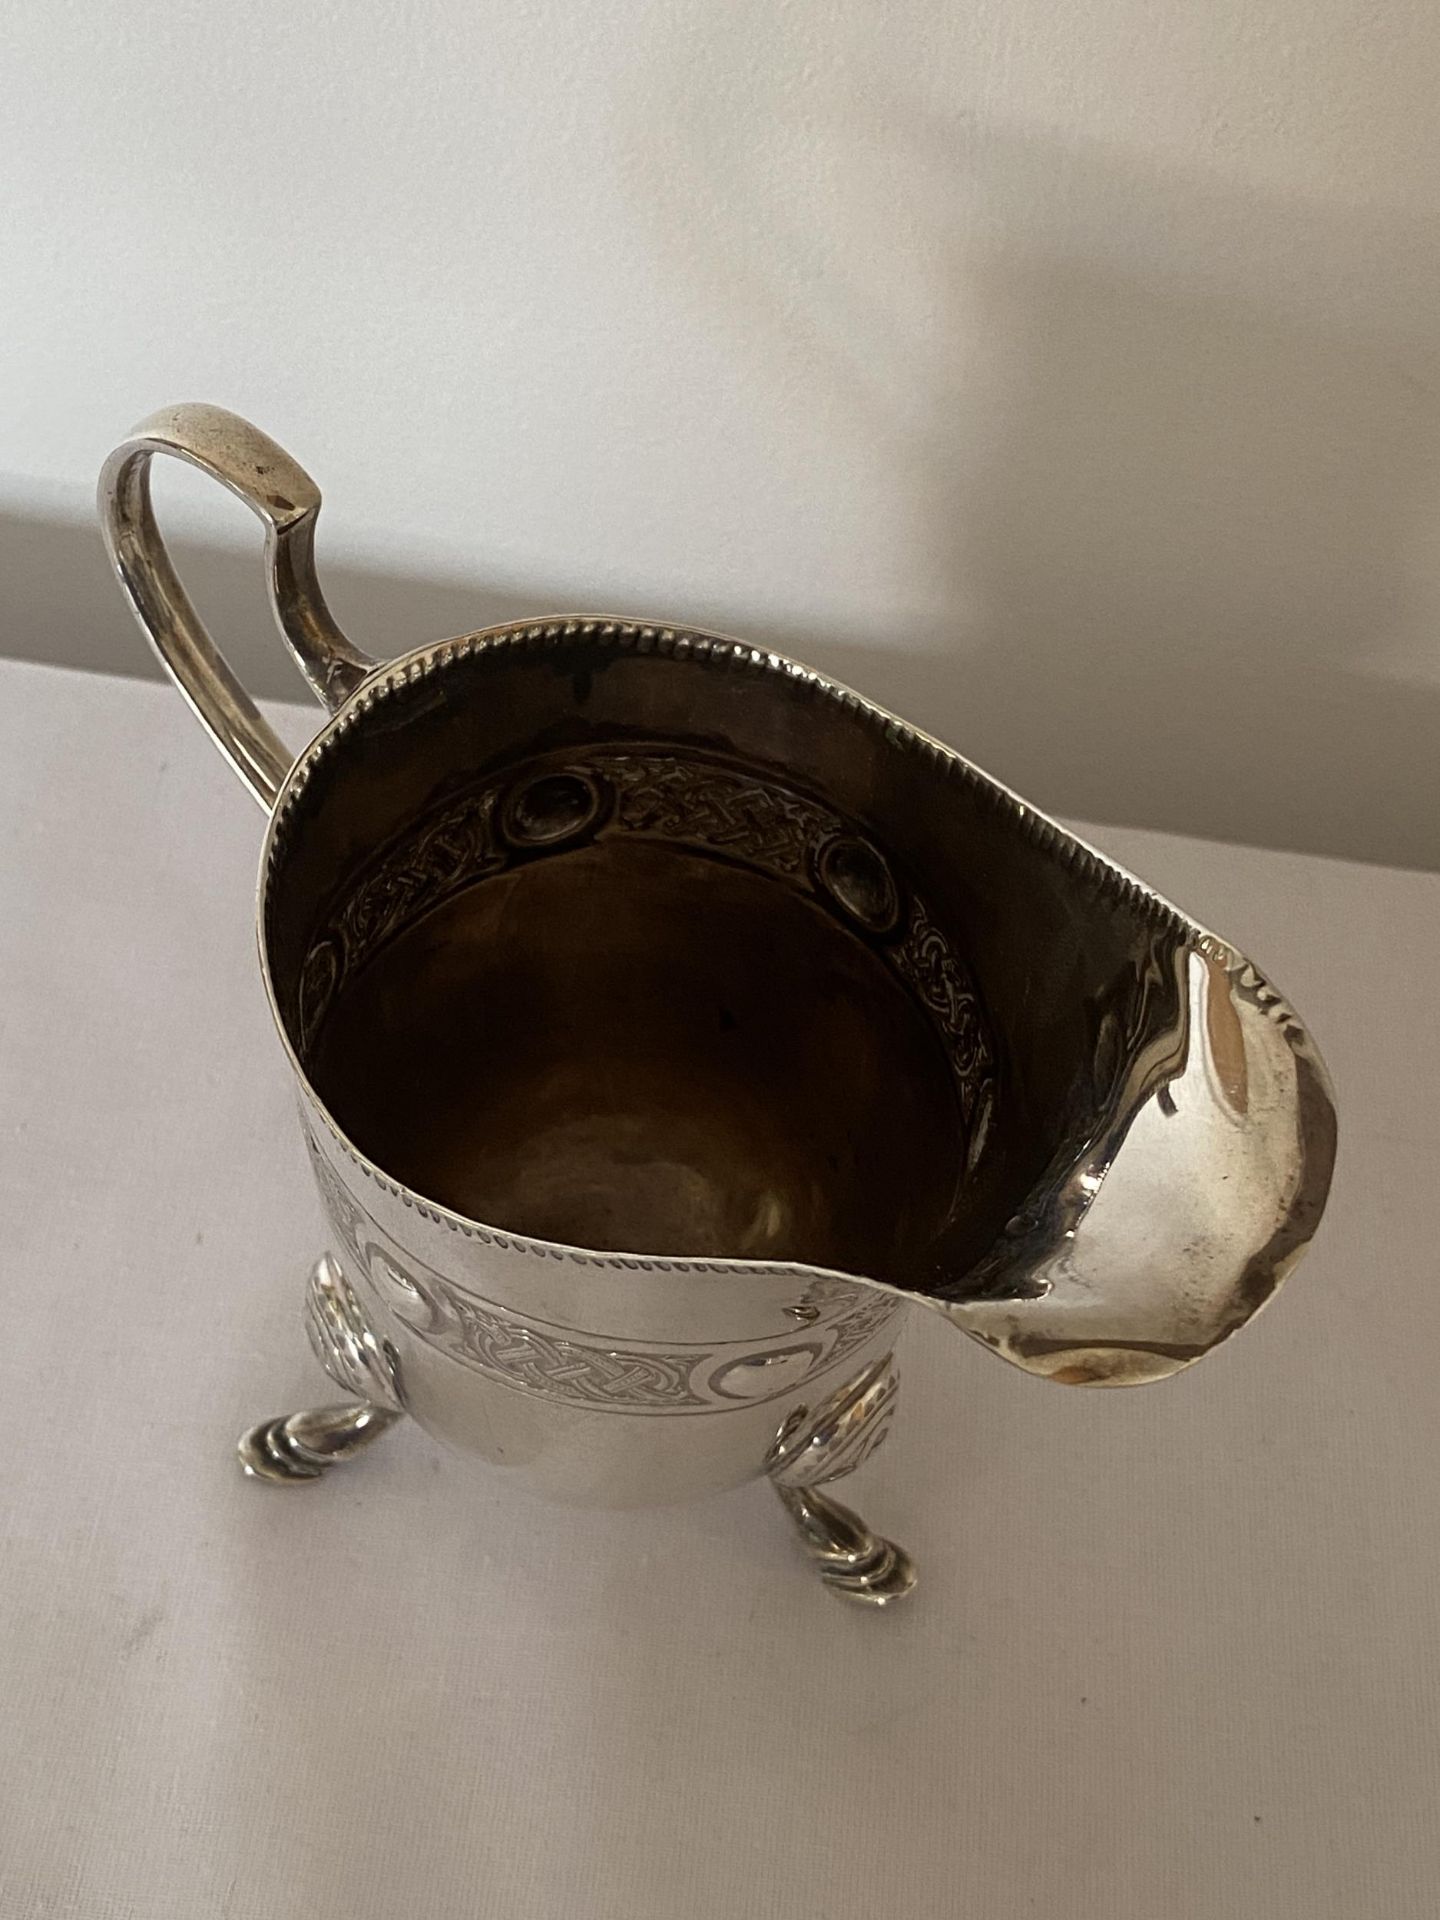 A GEORGE V 1917 HALLMARKED DUBLIN SILVER TANKARD, MAKER T WEIR & SONS, GROSS WEIGHT 163 GRAMS - Image 7 of 12